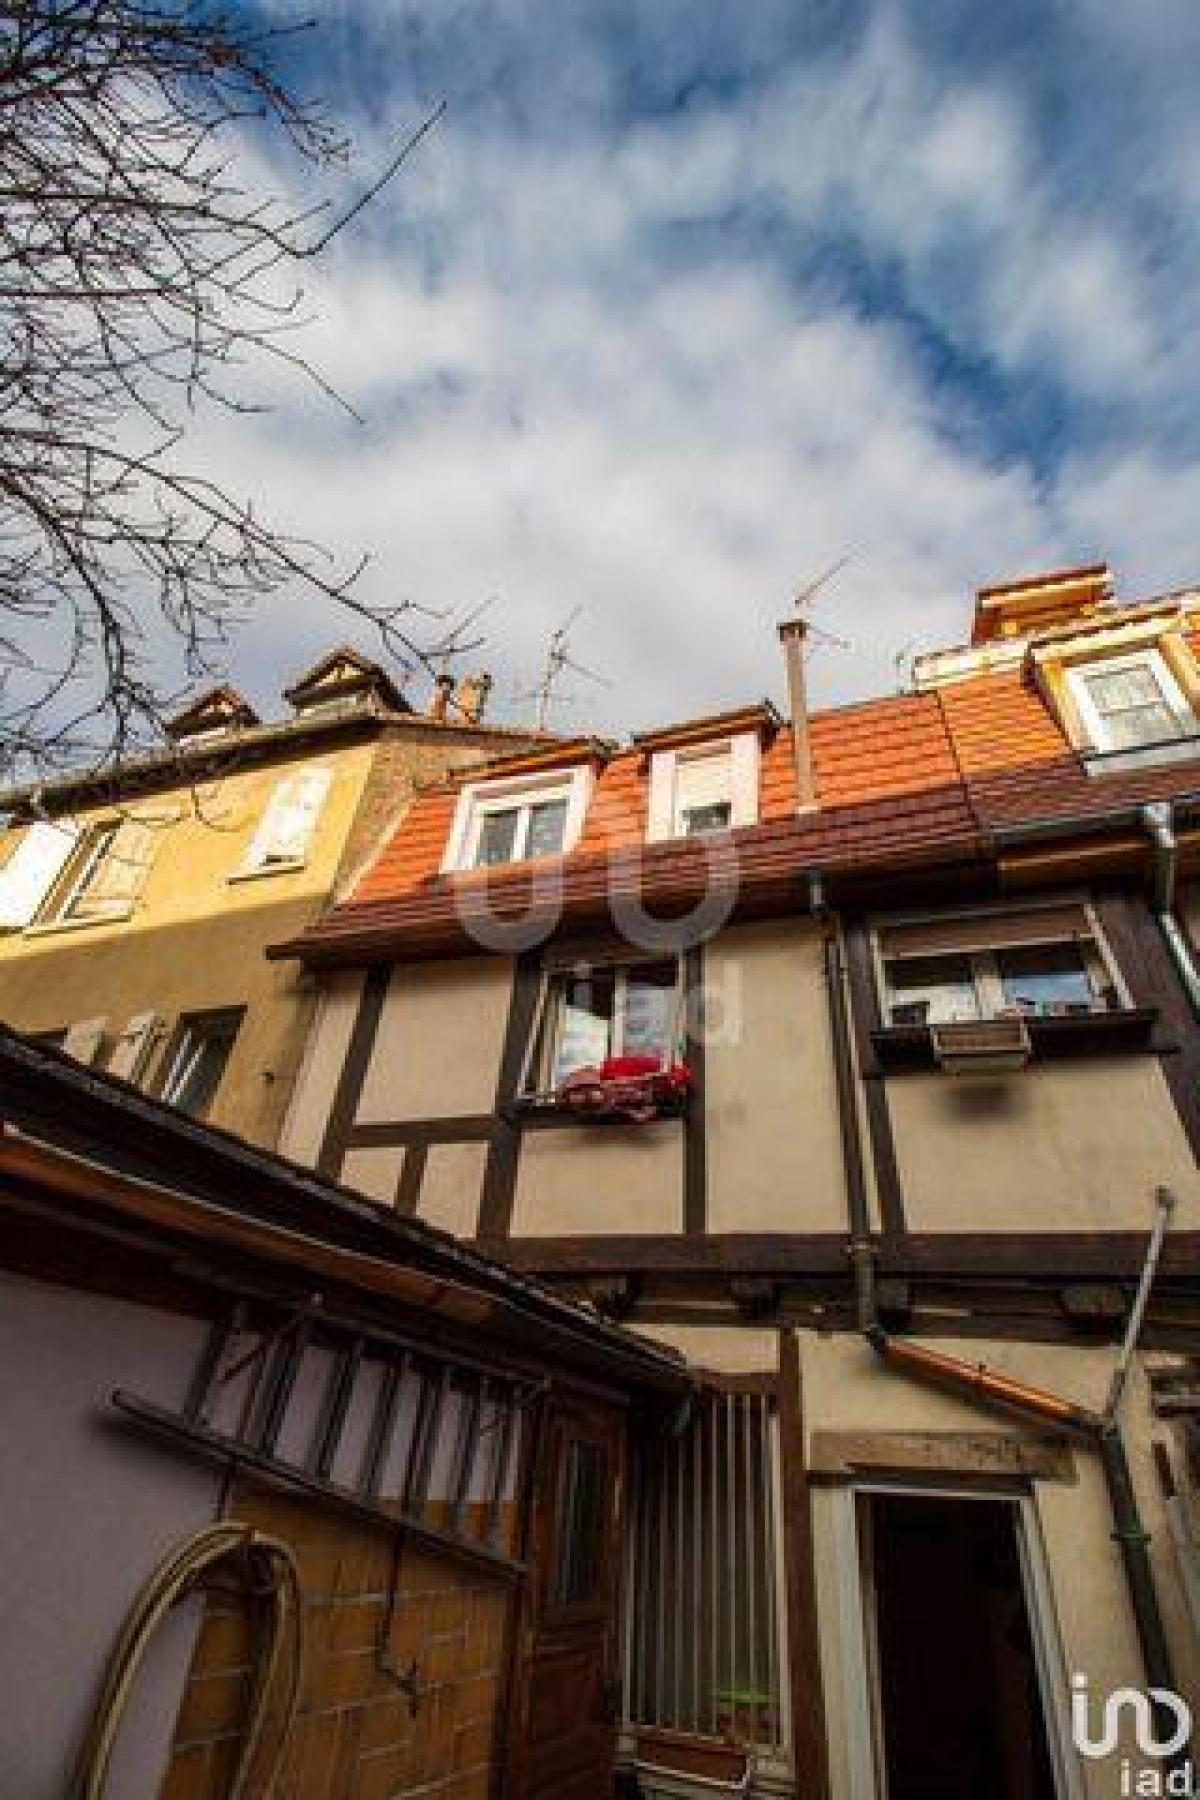 Picture of Home For Sale in Colmar, Alsace, France